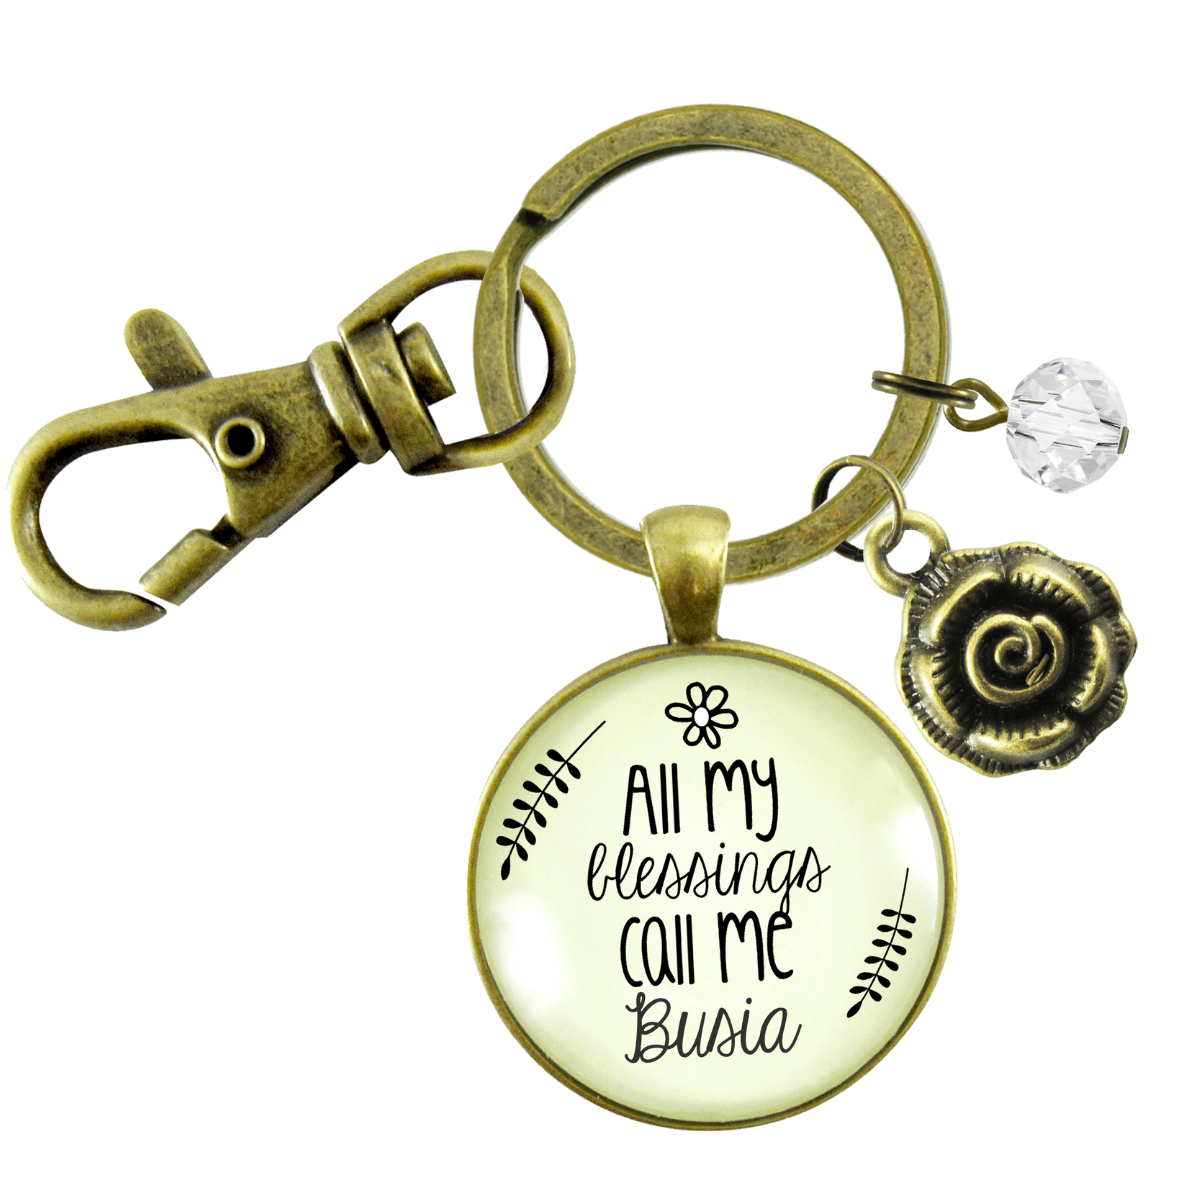 Busia Keychain All My Blessings Call Me Busia Polish Grandma Charm Jewelry Gift - Gutsy Goodness Handmade Jewelry;Busia Keychain All My Blessings Call Me Busia Polish Grandma Charm Jewelry Gift - Gutsy Goodness Handmade Jewelry Gifts